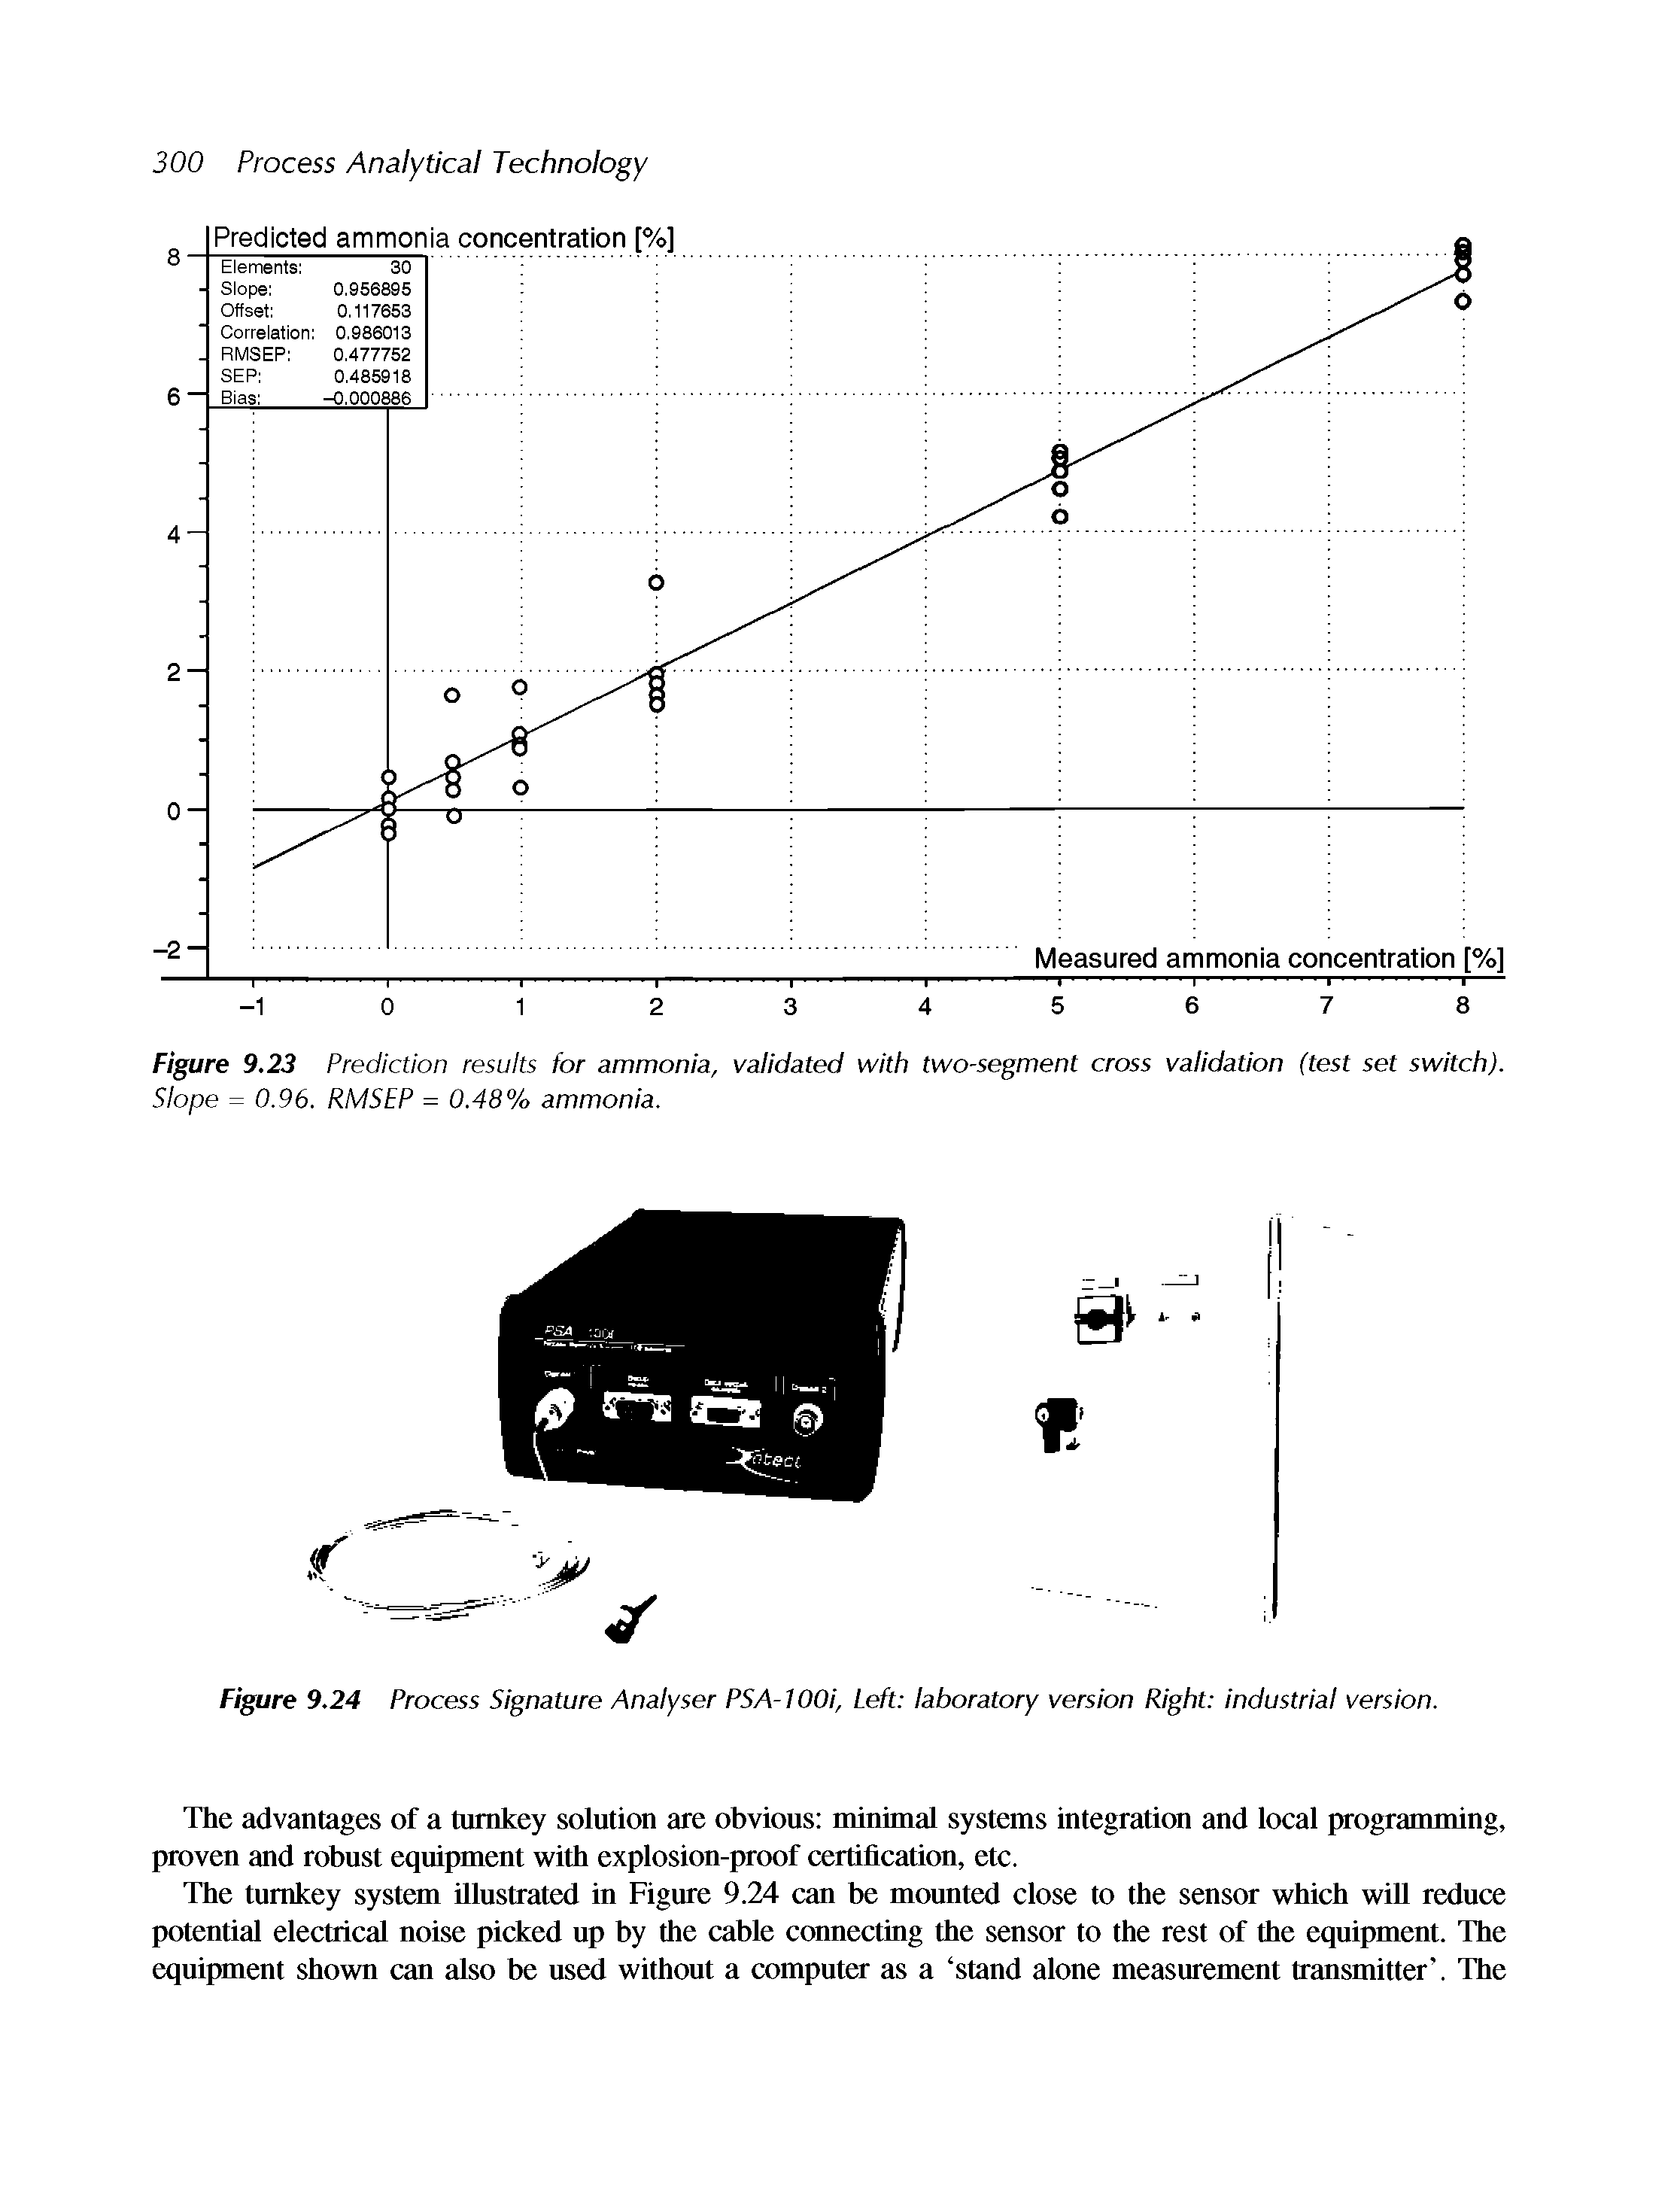 Figure 9.23 Prediction resuits for ammonia, validated with two-segment cross validation (test set switch). Slope = 0.96. RMSEP = 0.48% ammonia.